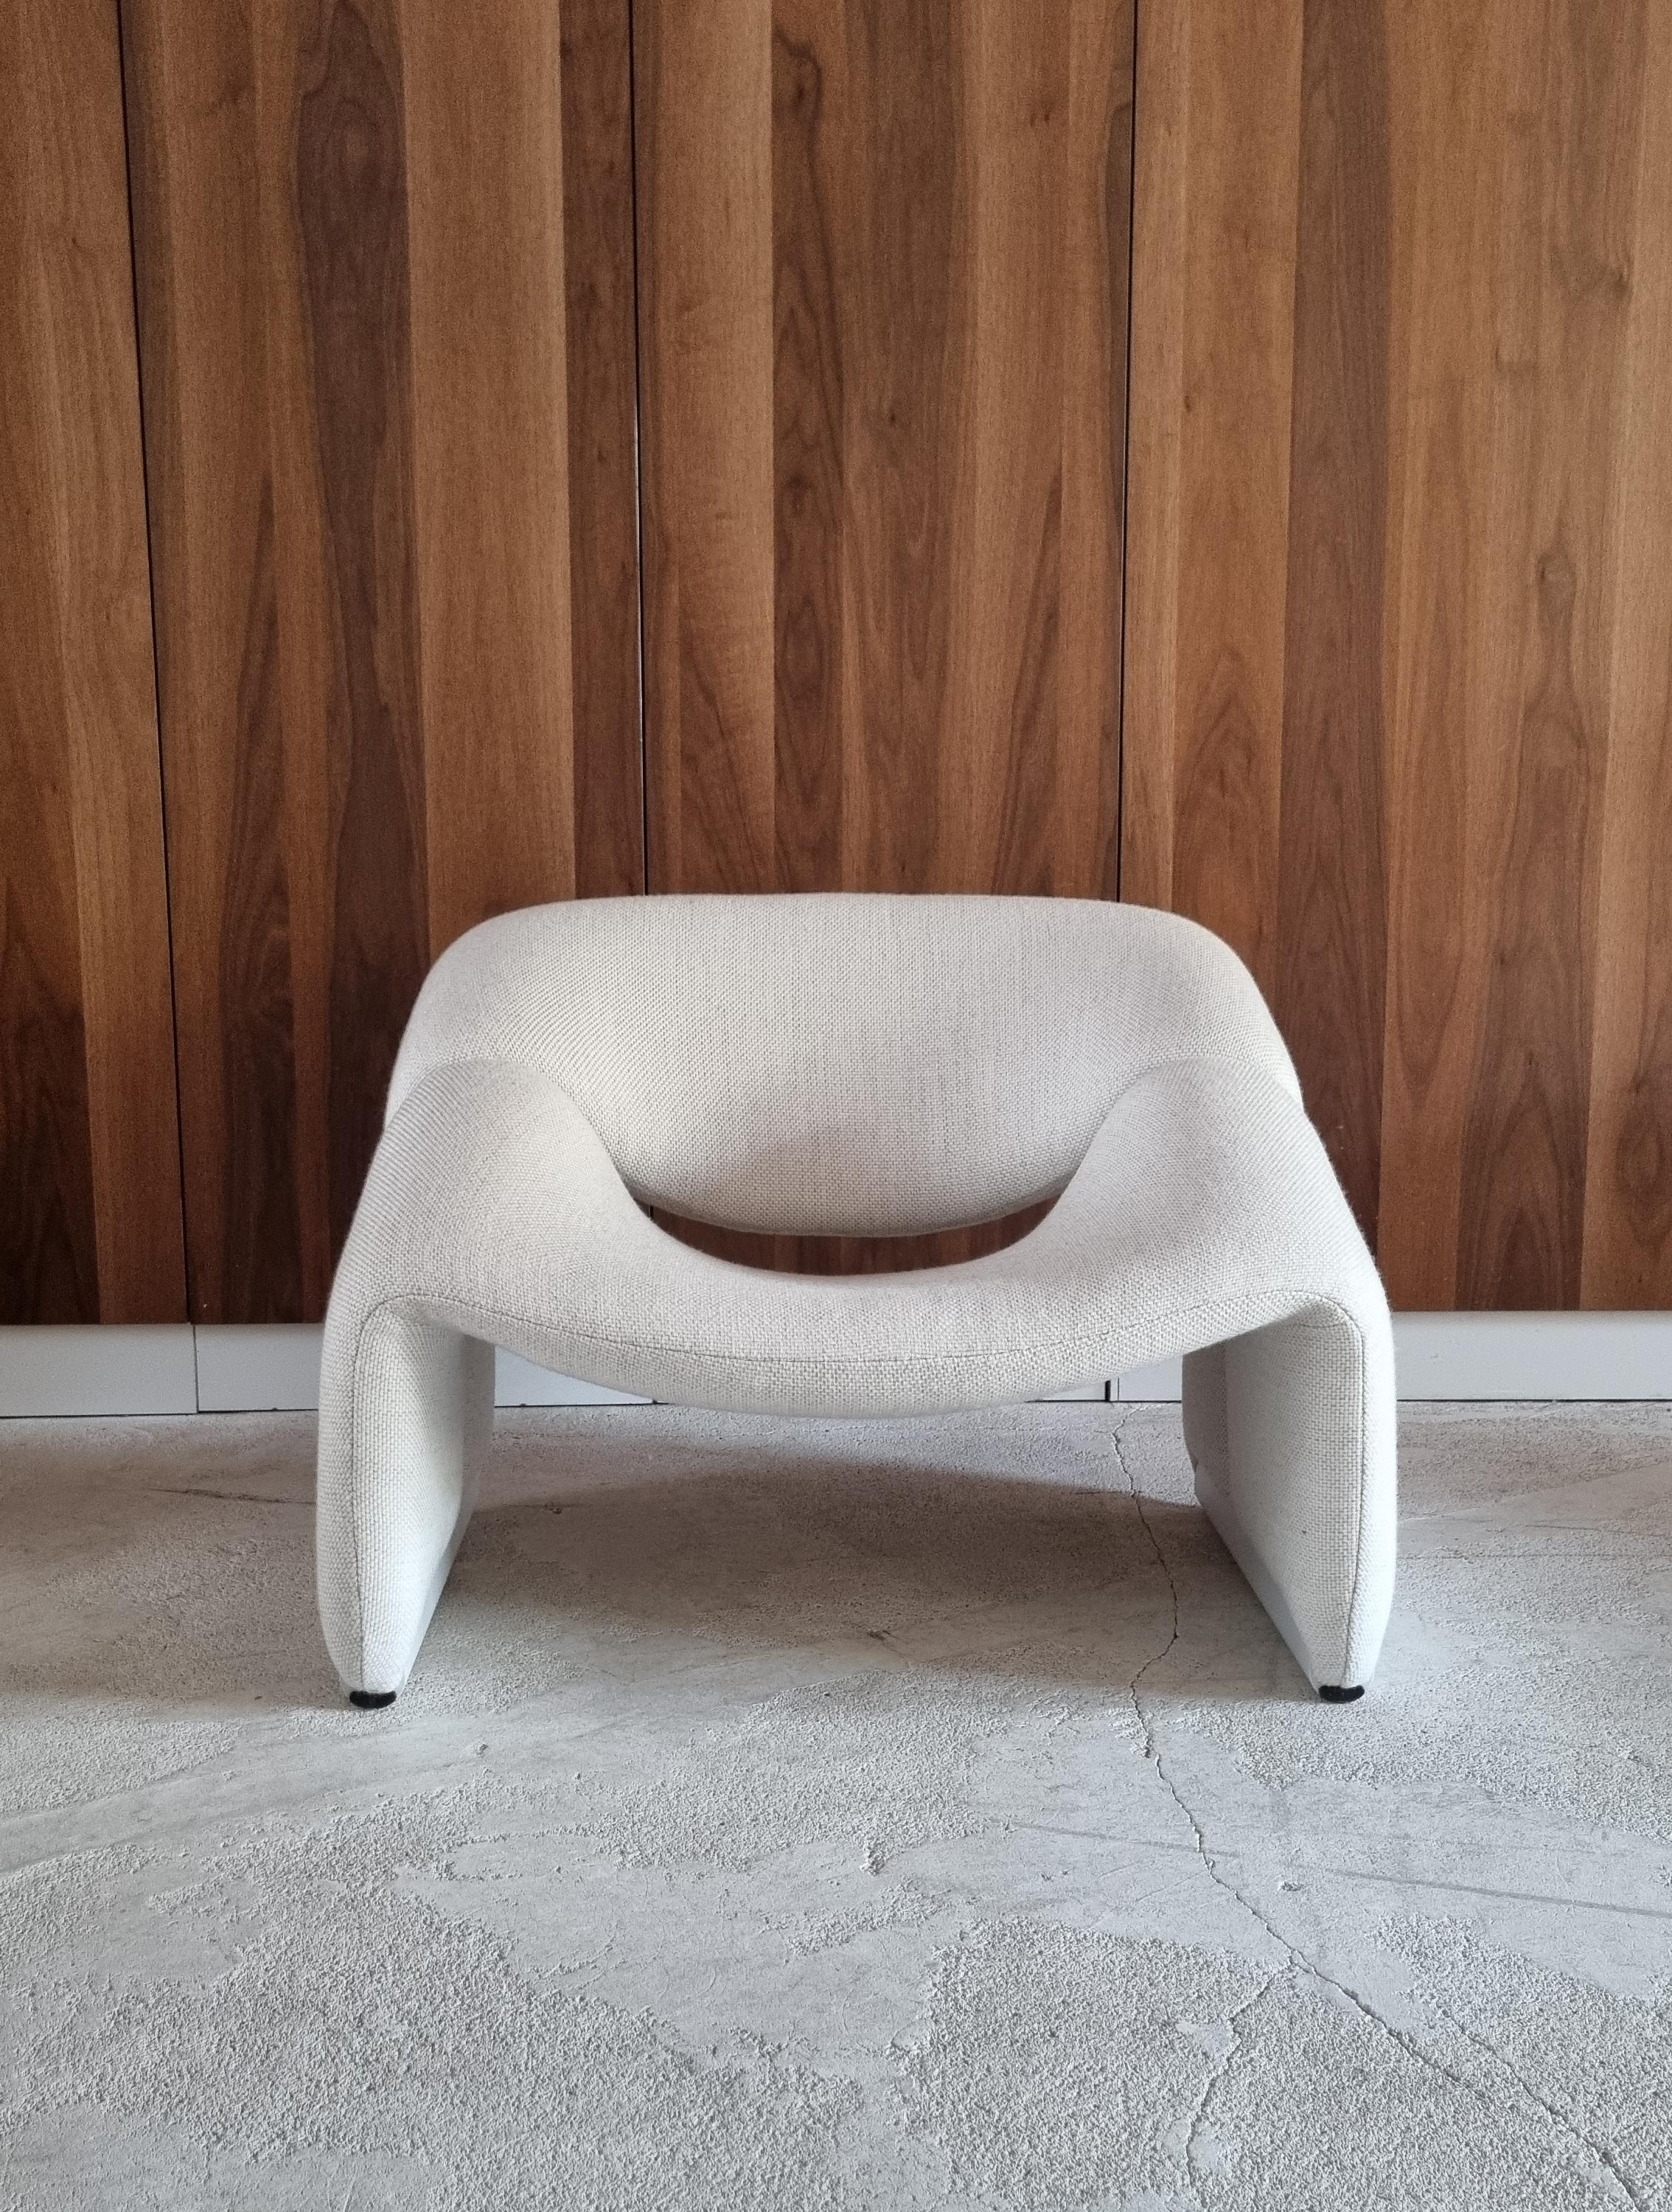 The Groovy chair was designed by France’s top designer Pierre Paulin for Holland’s most avant-garde furniture maker Artifort. Their compactness combined with great comfort and of course iconic looks made this chair one of the stars of the